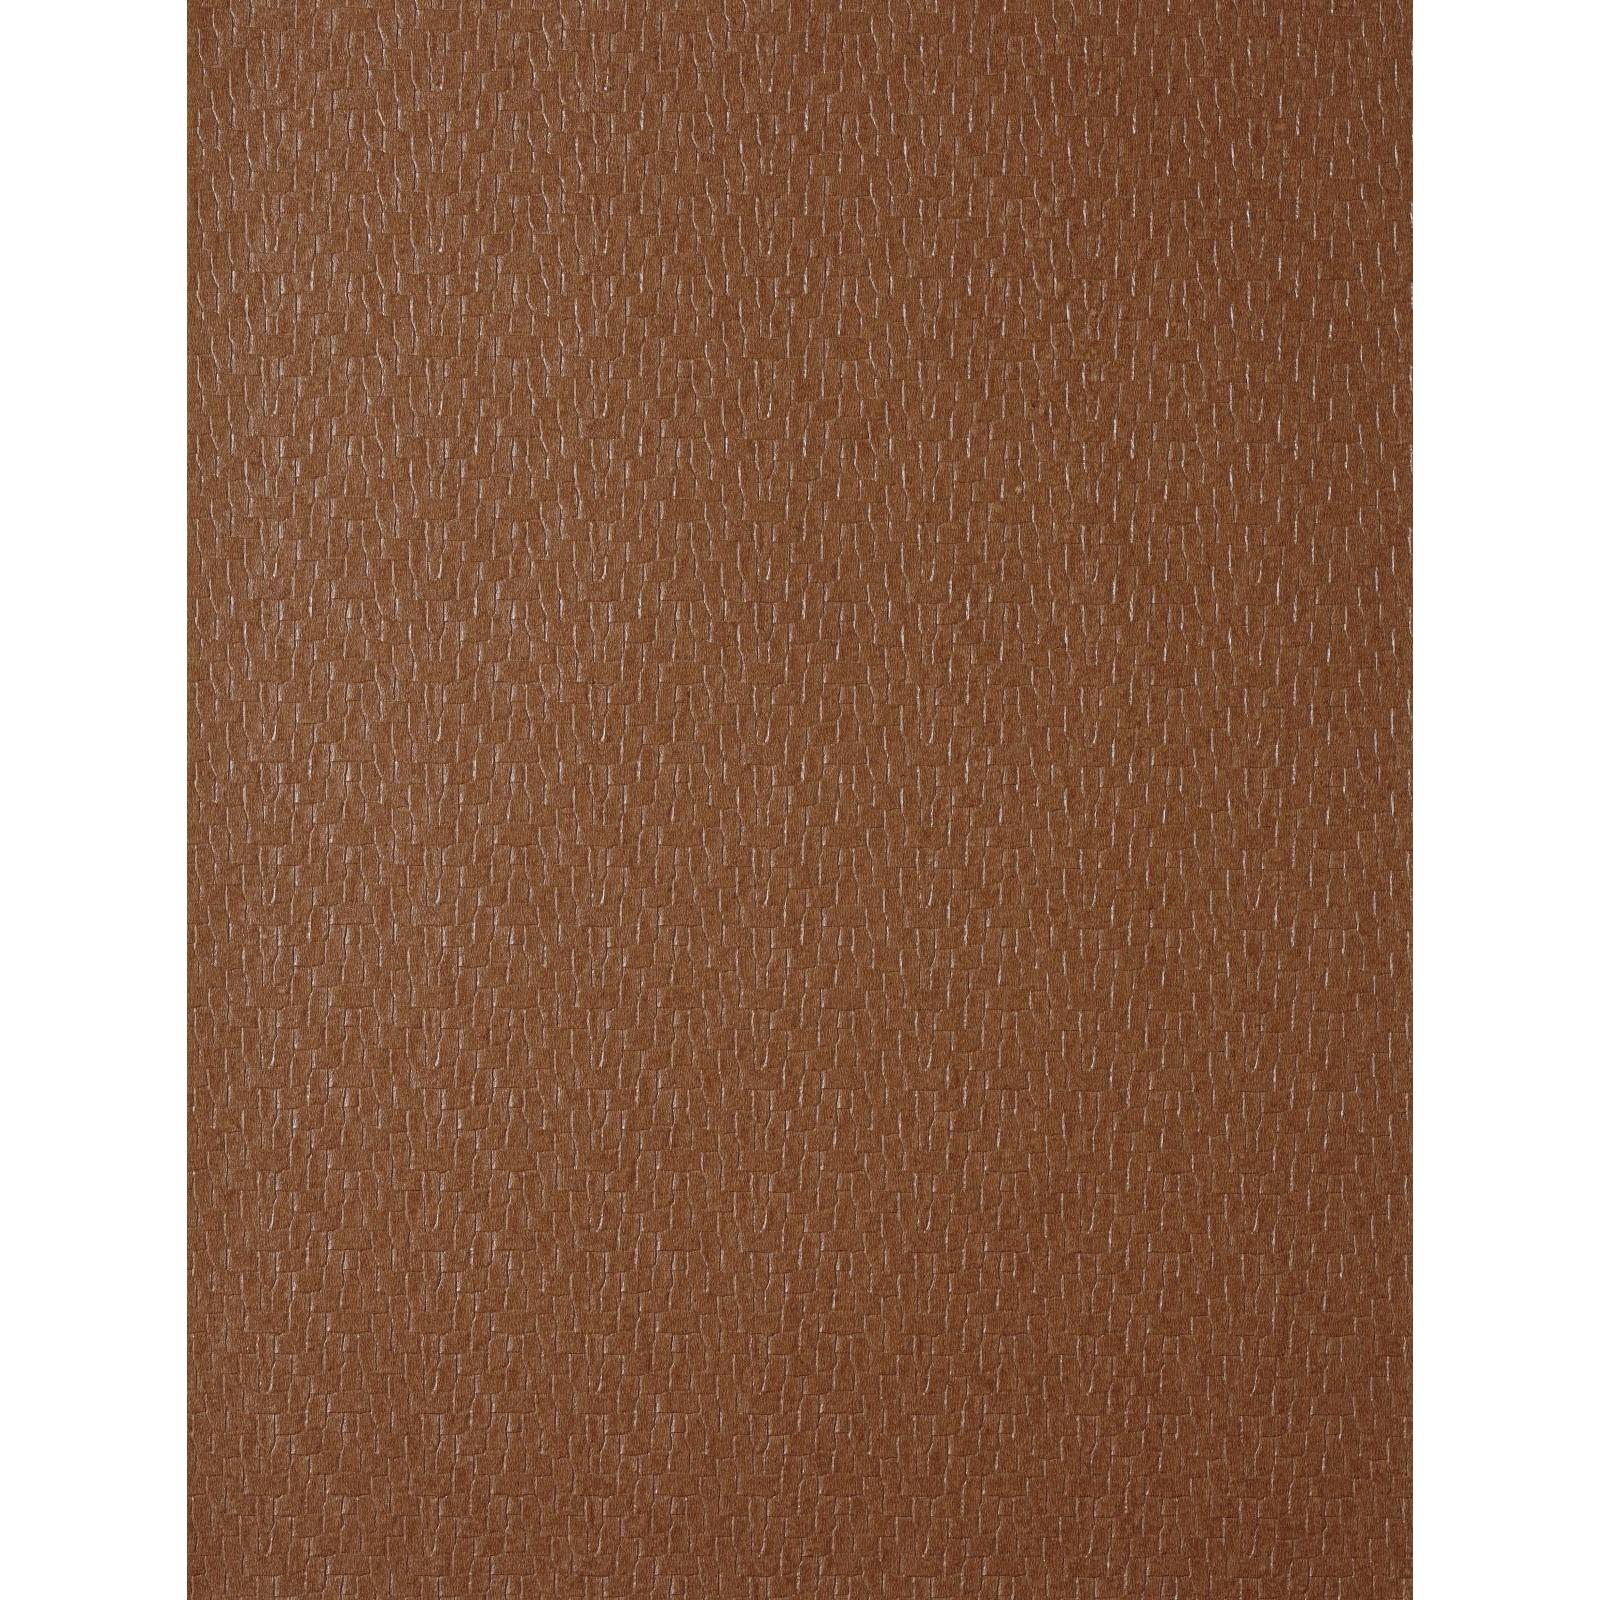 York Wallcoverings Decorative Finishes Leather Basket Weave Wallpaper